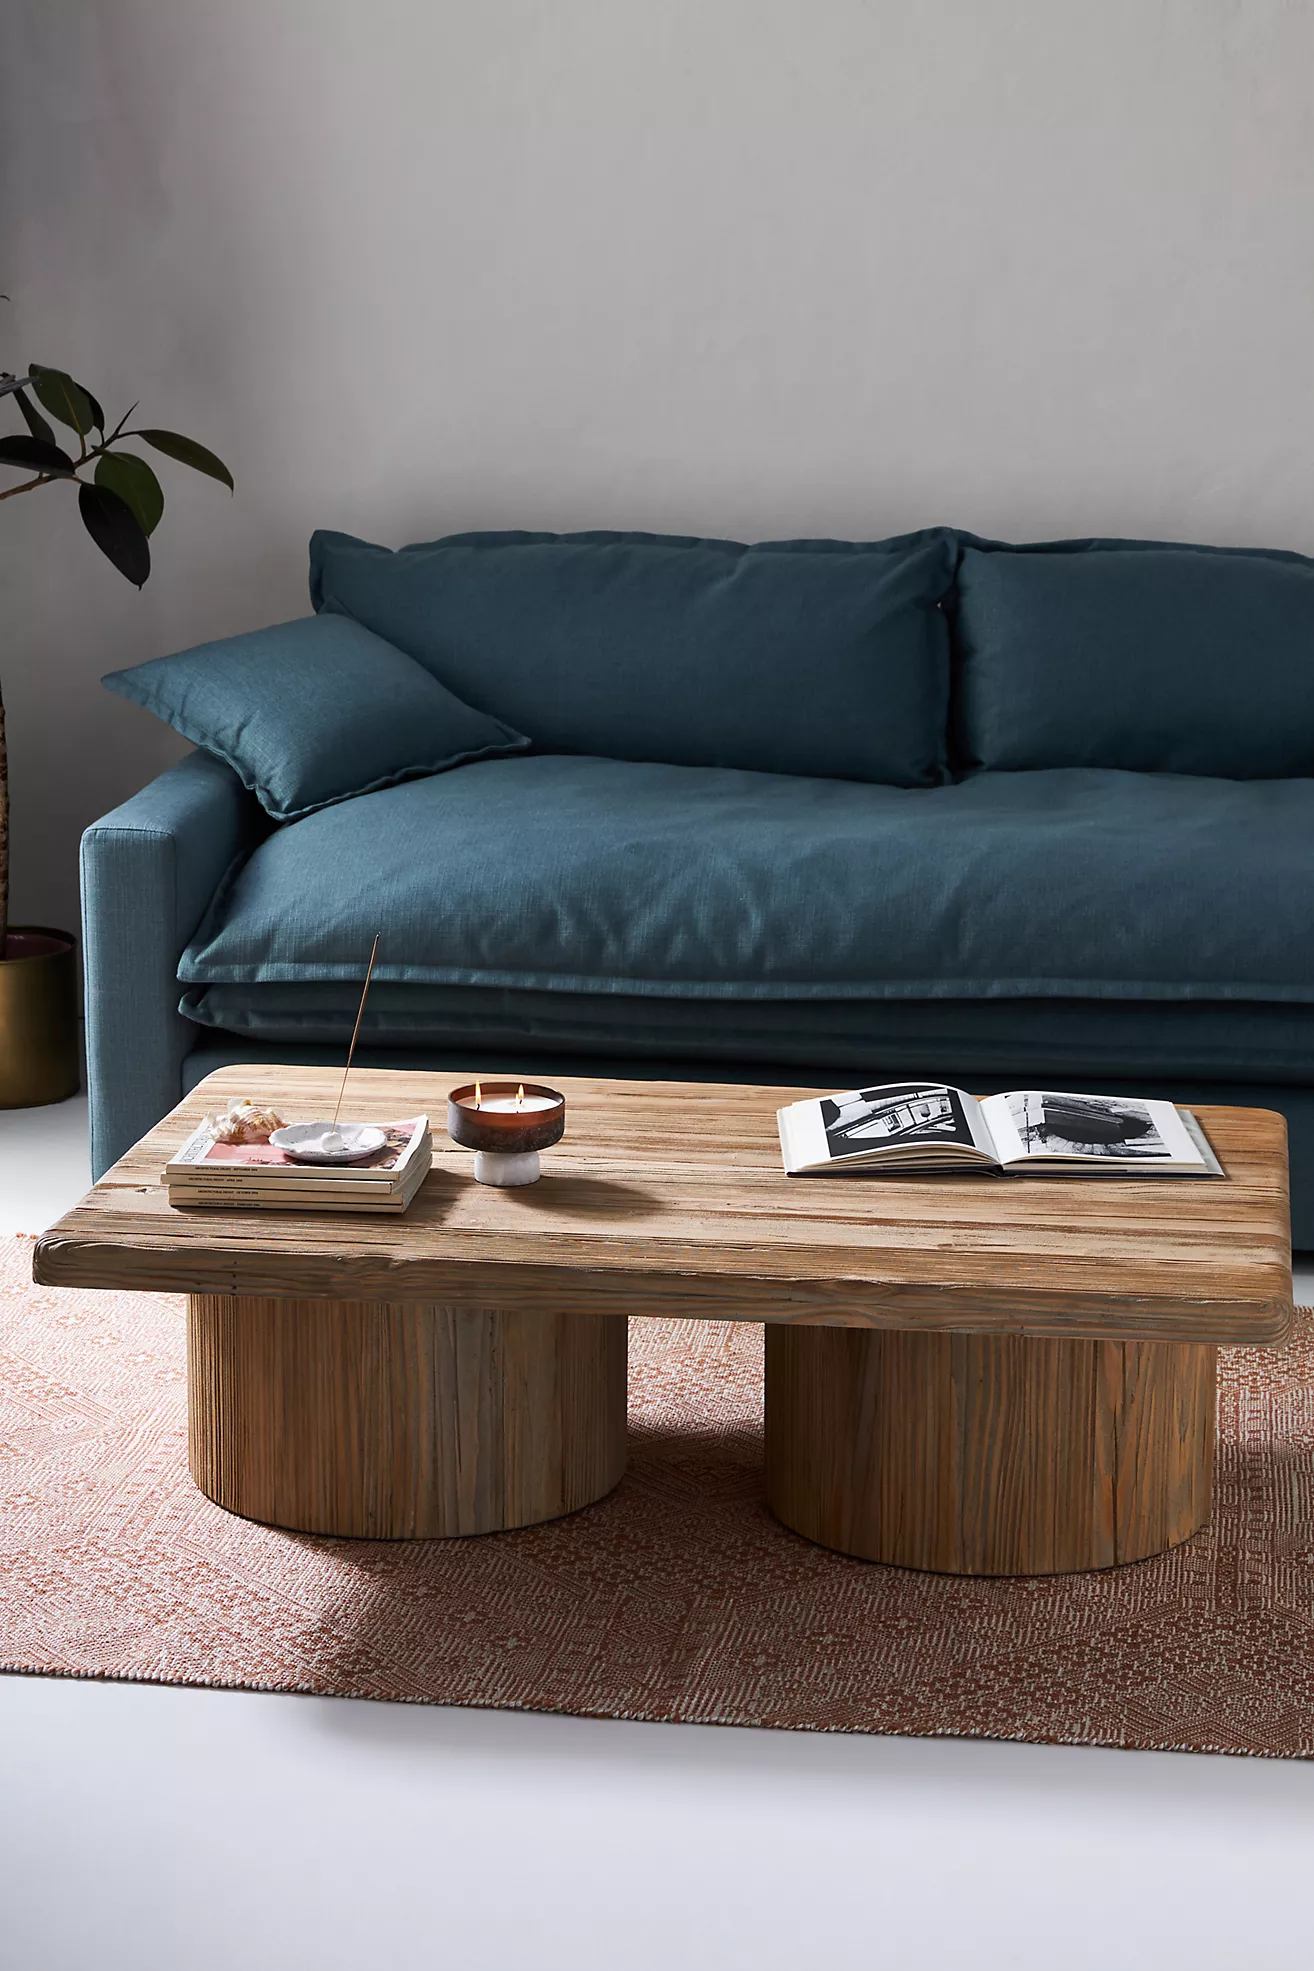 Try a Reclaimed Wood Coffee Table